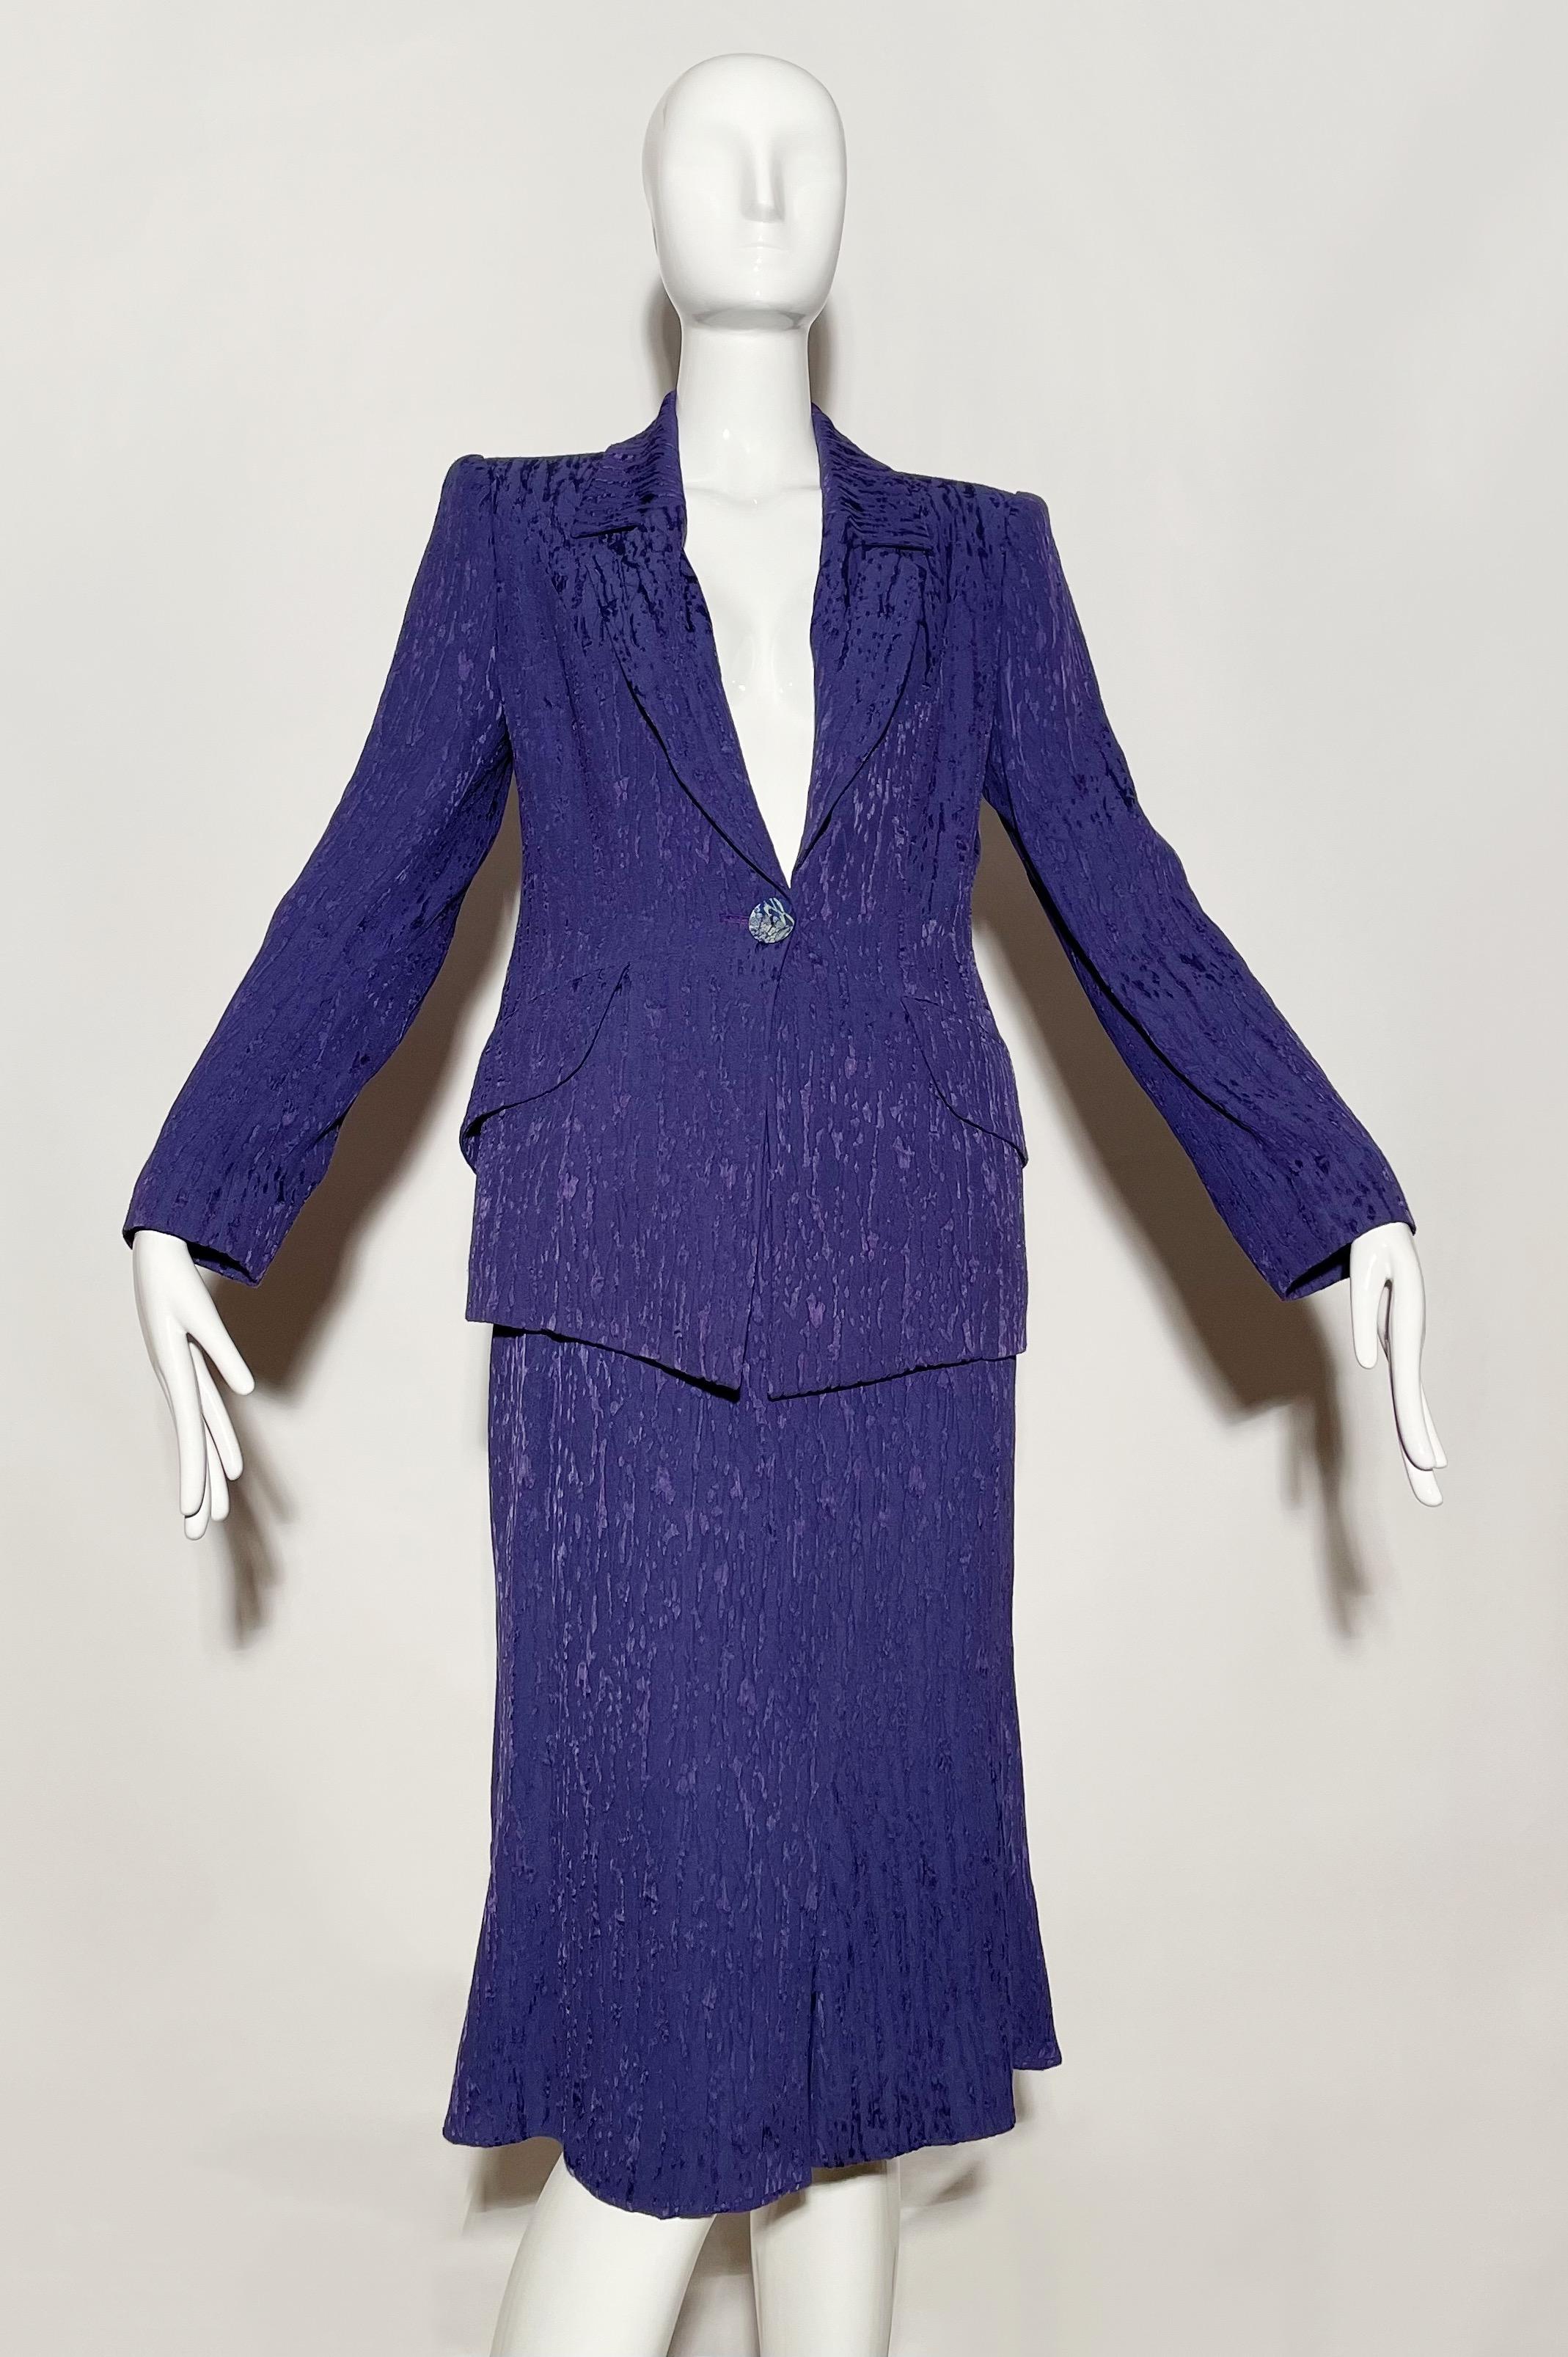 Purple skirt suit. Single Breasted. Shoulder pads. Front pockets. Zipper closure on skirt. Viscose and Silk. Lined. Made in France.

*Condition: excellent vintage condition, no visible flaws.

Measurements Taken Laying Flat (inches)—

Shoulder to